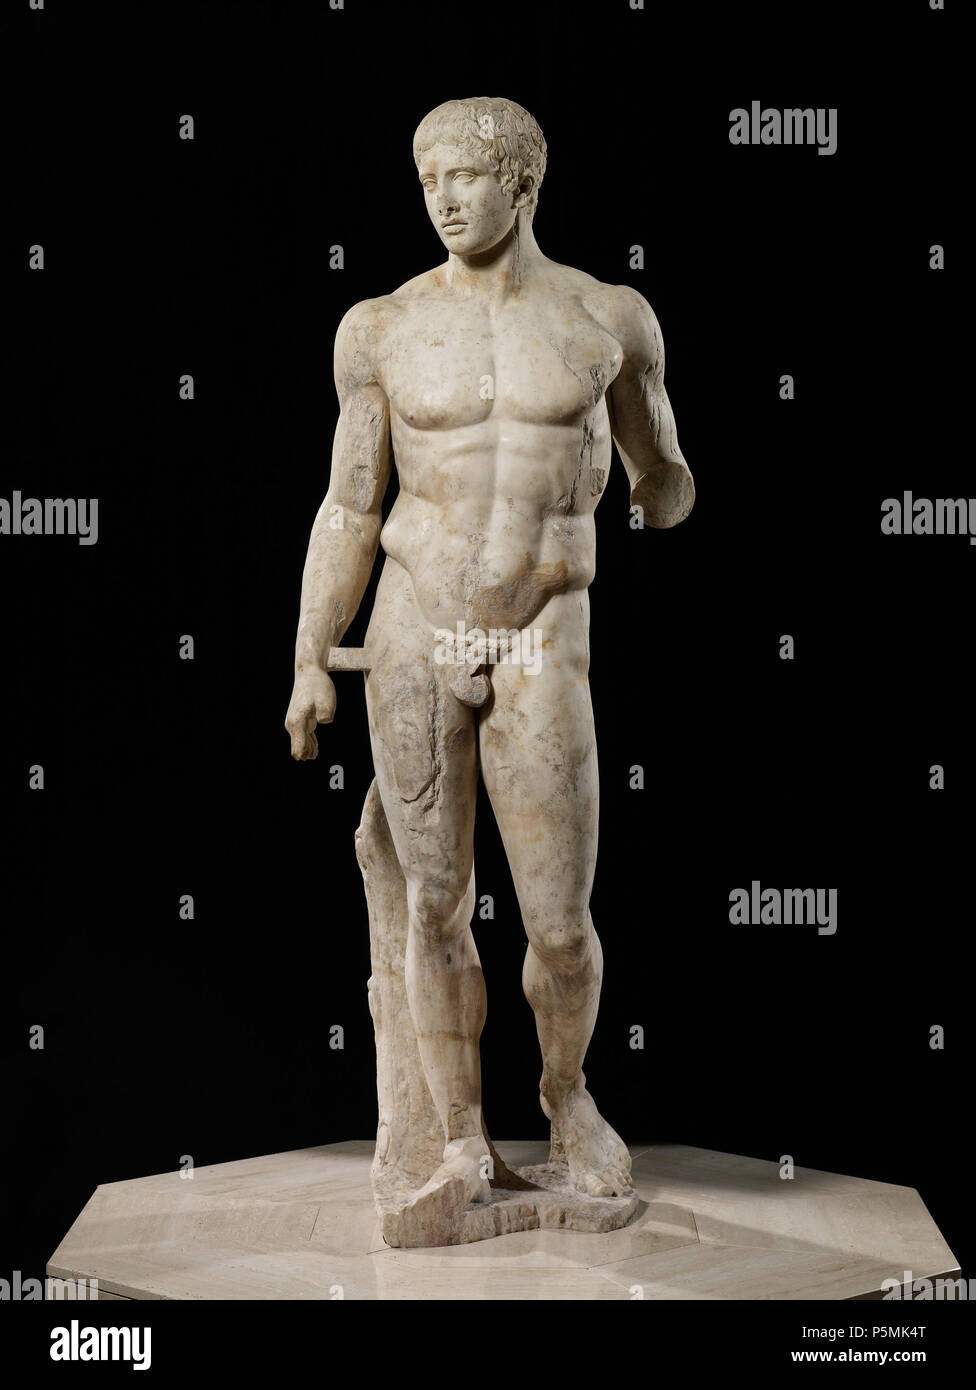 N/A. English: The Doryphoros, 20–50 BCE Unknown Roman after Polykleitos Pentelic marble 78 x 19 x 19 in. (198.12 x 48.26 x 48.26 cm) Minneapolis Institute of Art The John R. Van Derlip Fund and Gift of funds from Bruce B. Dayton, an anonymous donor, Mr. and Mrs. Kenneth Dayton, Mr. and Mrs. W. John Driscoll, Mr. and Mrs. Alfred Harrison, Mr. and Mrs. John Andrus, Mr. and Mrs. Judson Dayton, Mr. and Mrs. Stephen Keating, Mr. and Mrs. Pierce McNally, Mr. and Mrs. Donald Dayton, Mr. and Mrs. Wayne MacFarlane, and many other generous friends of the Institute 86.6 . 120–50 BCE. Minneapolis Institut Stock Photo